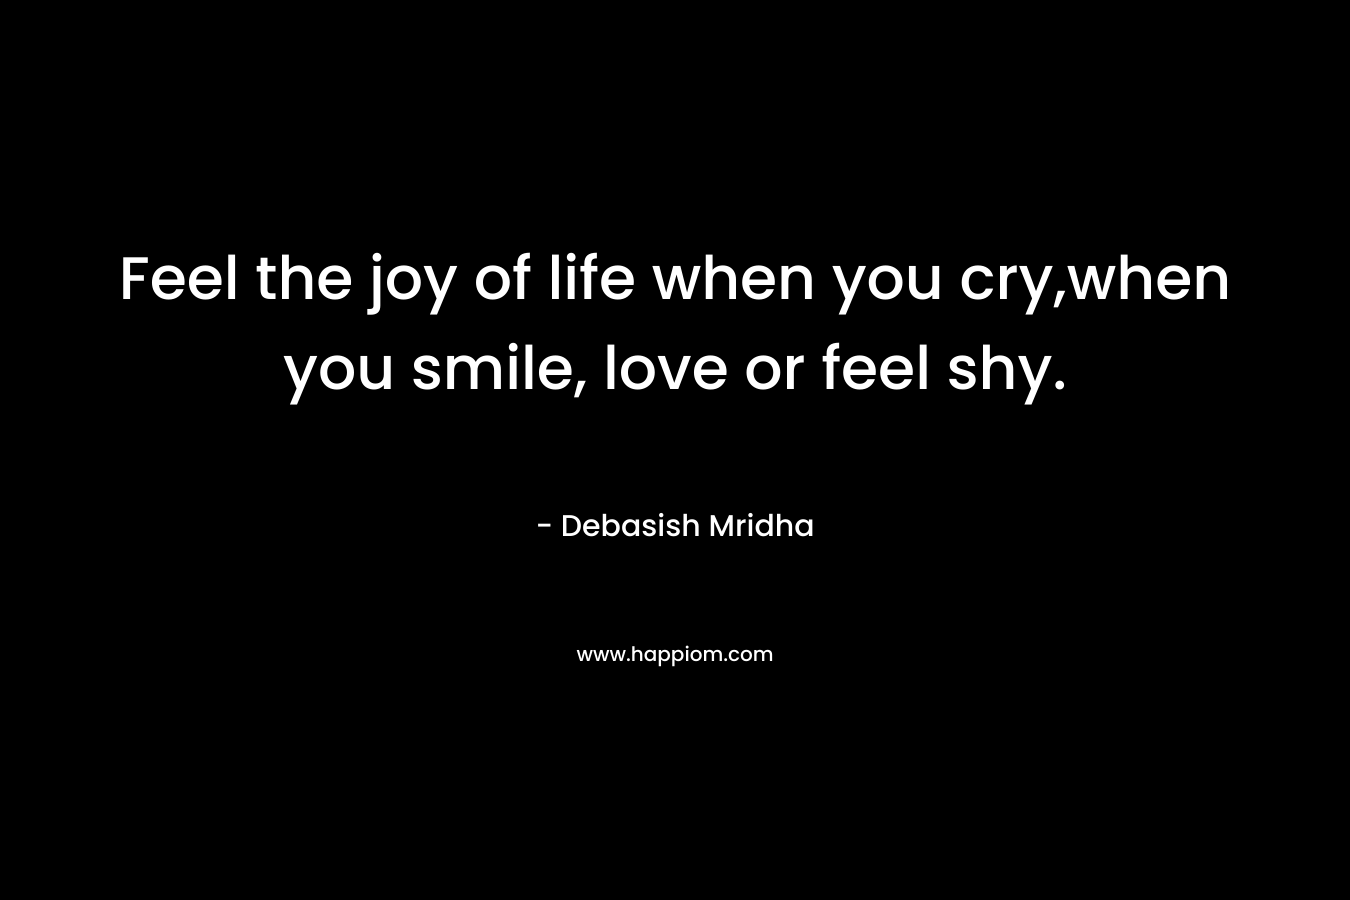 Feel the joy of life when you cry,when you smile, love or feel shy.